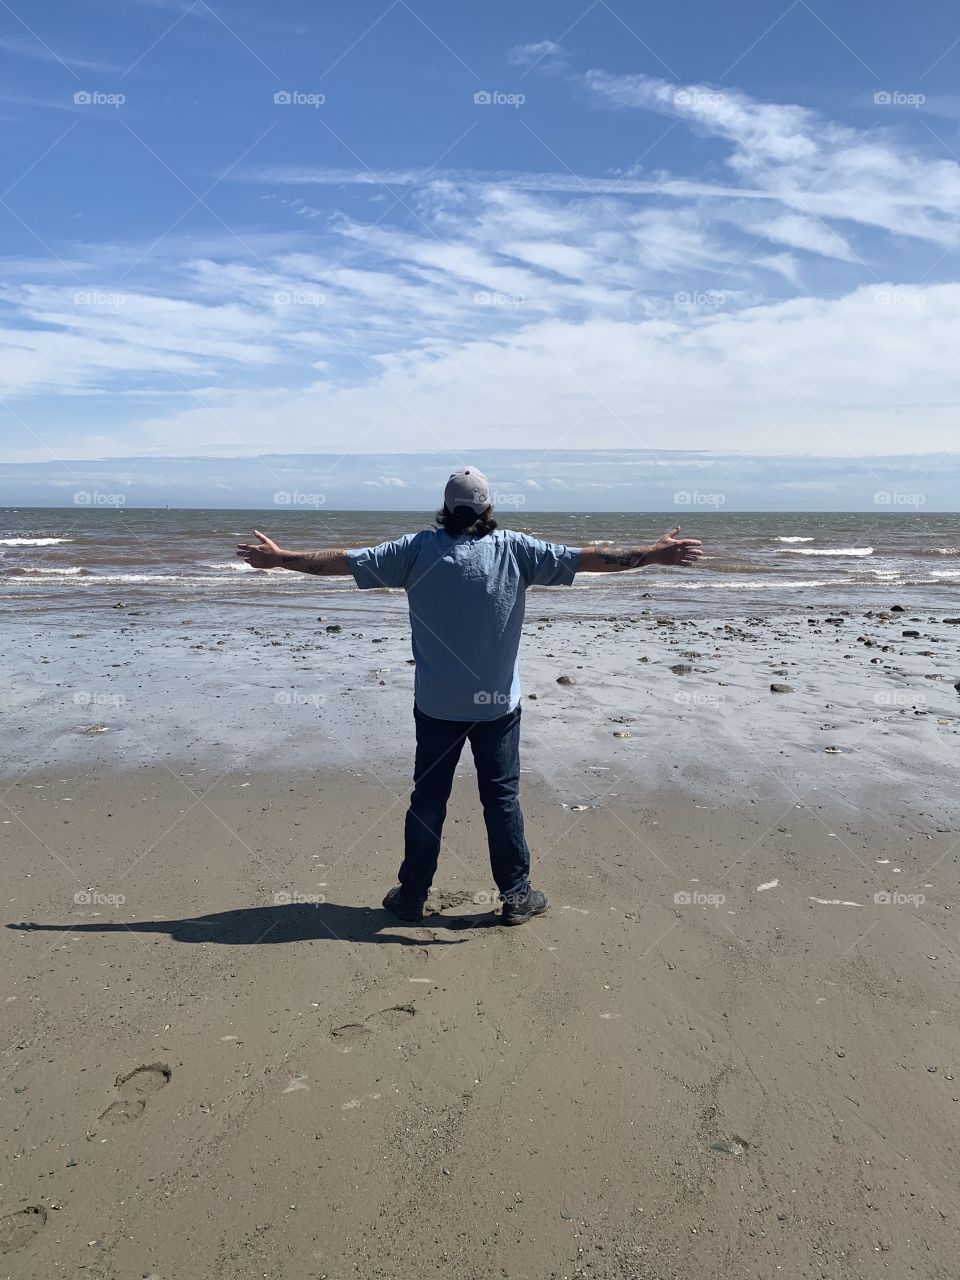 Live life as you see fit! A day at the Fundy National Park. Hello Bay of Fundy! Alma, New Brunswick Canada 🇨🇦